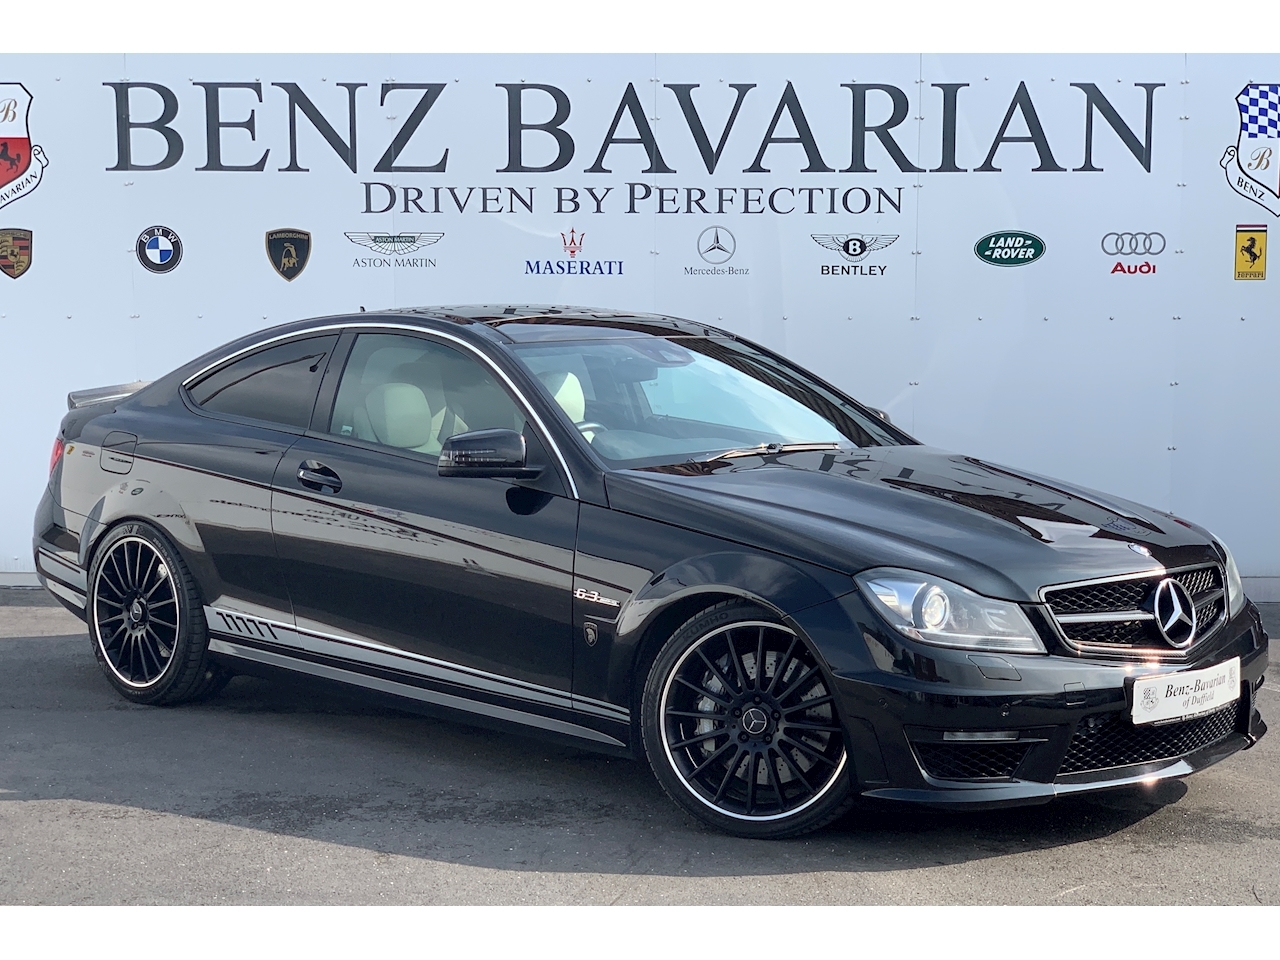 6.3 C63 AMG Coupe 2dr Petrol MCT 7S (280 g/km, 457 bhp)